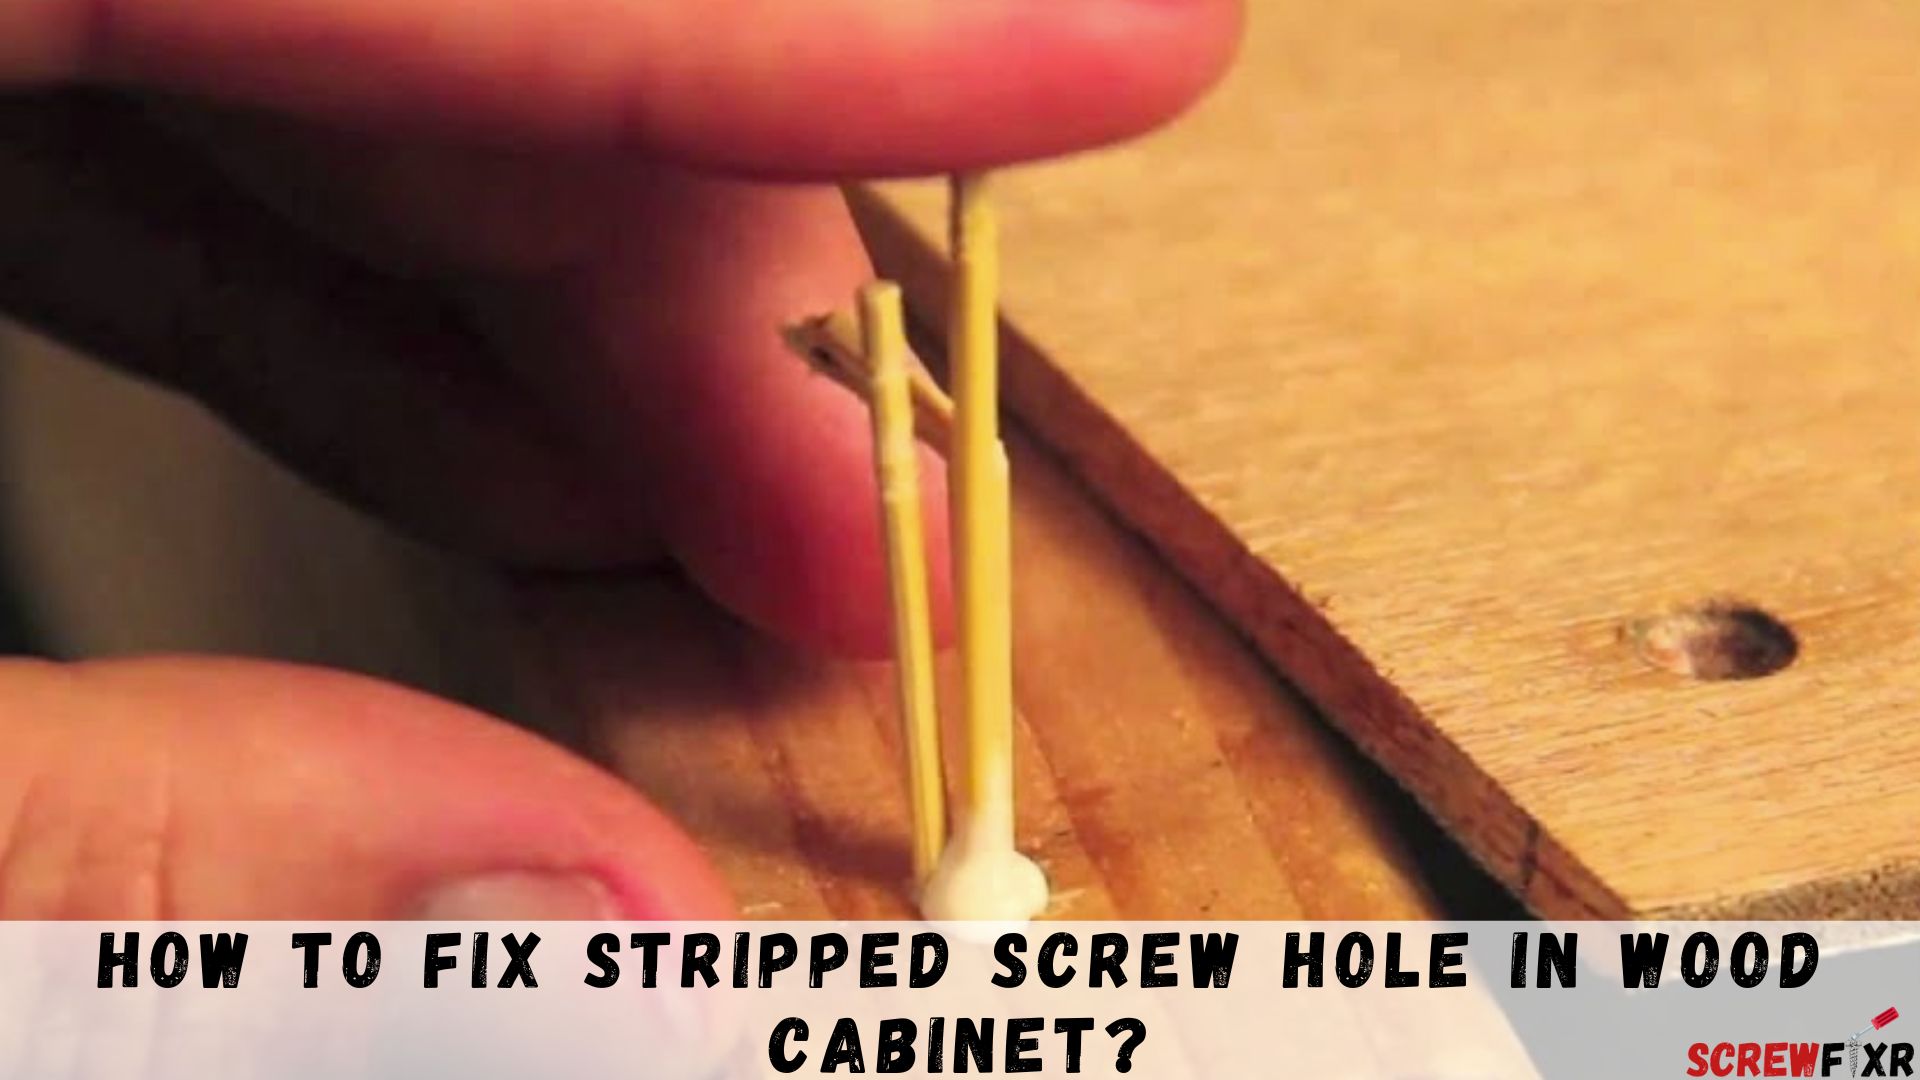 How To Fix Stripped Screw Hole In Wood Cabinet